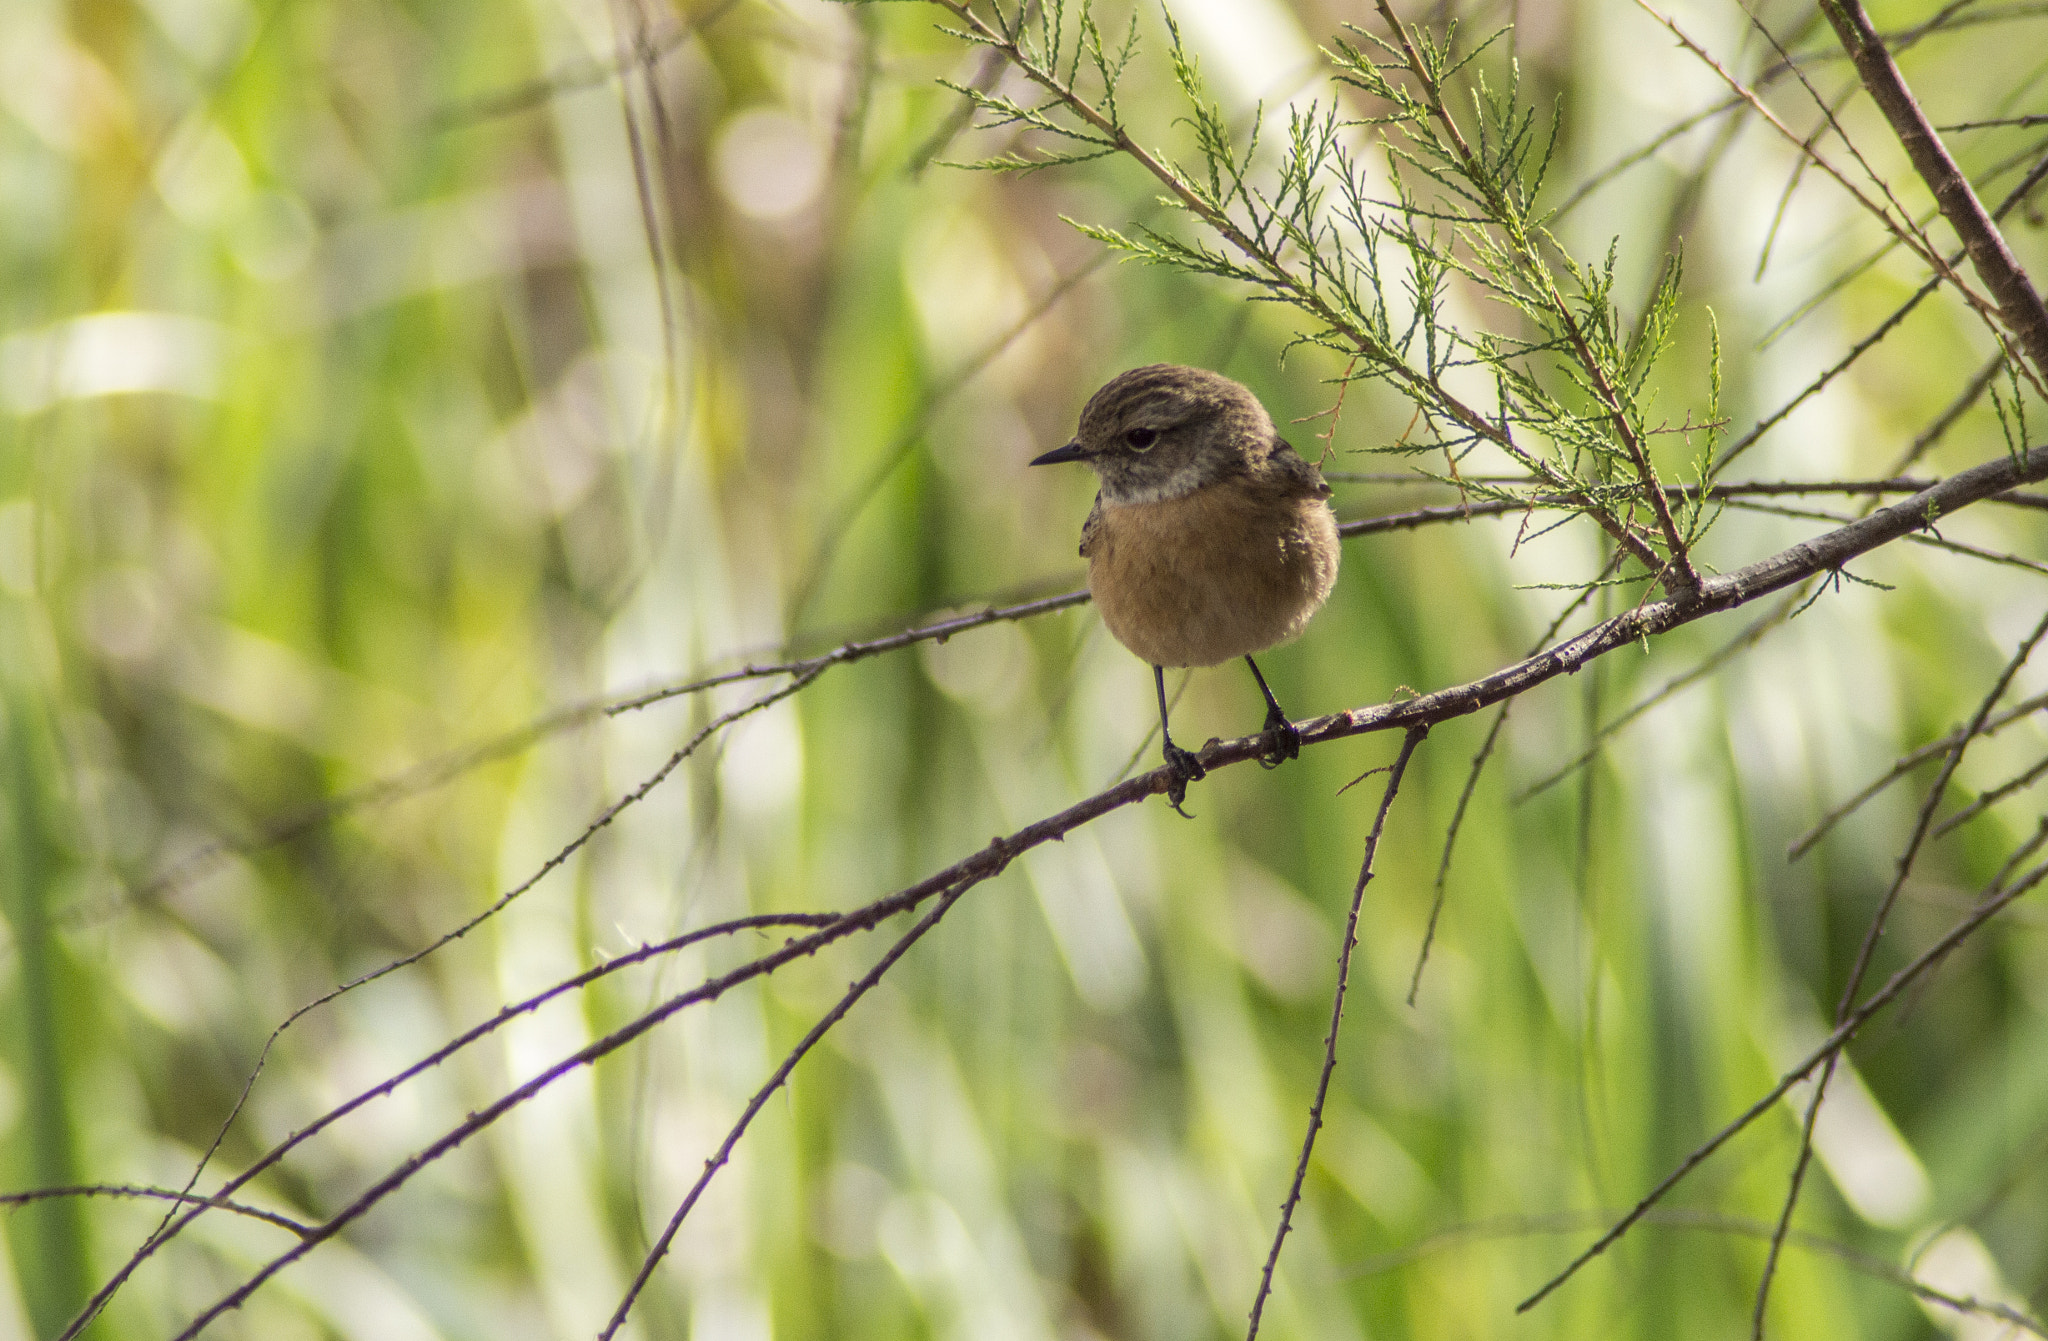 Tamron AF 200-400mm f/5.6 LD IF (75D) sample photo. Tarabilla común hembra - common stonechat female photography